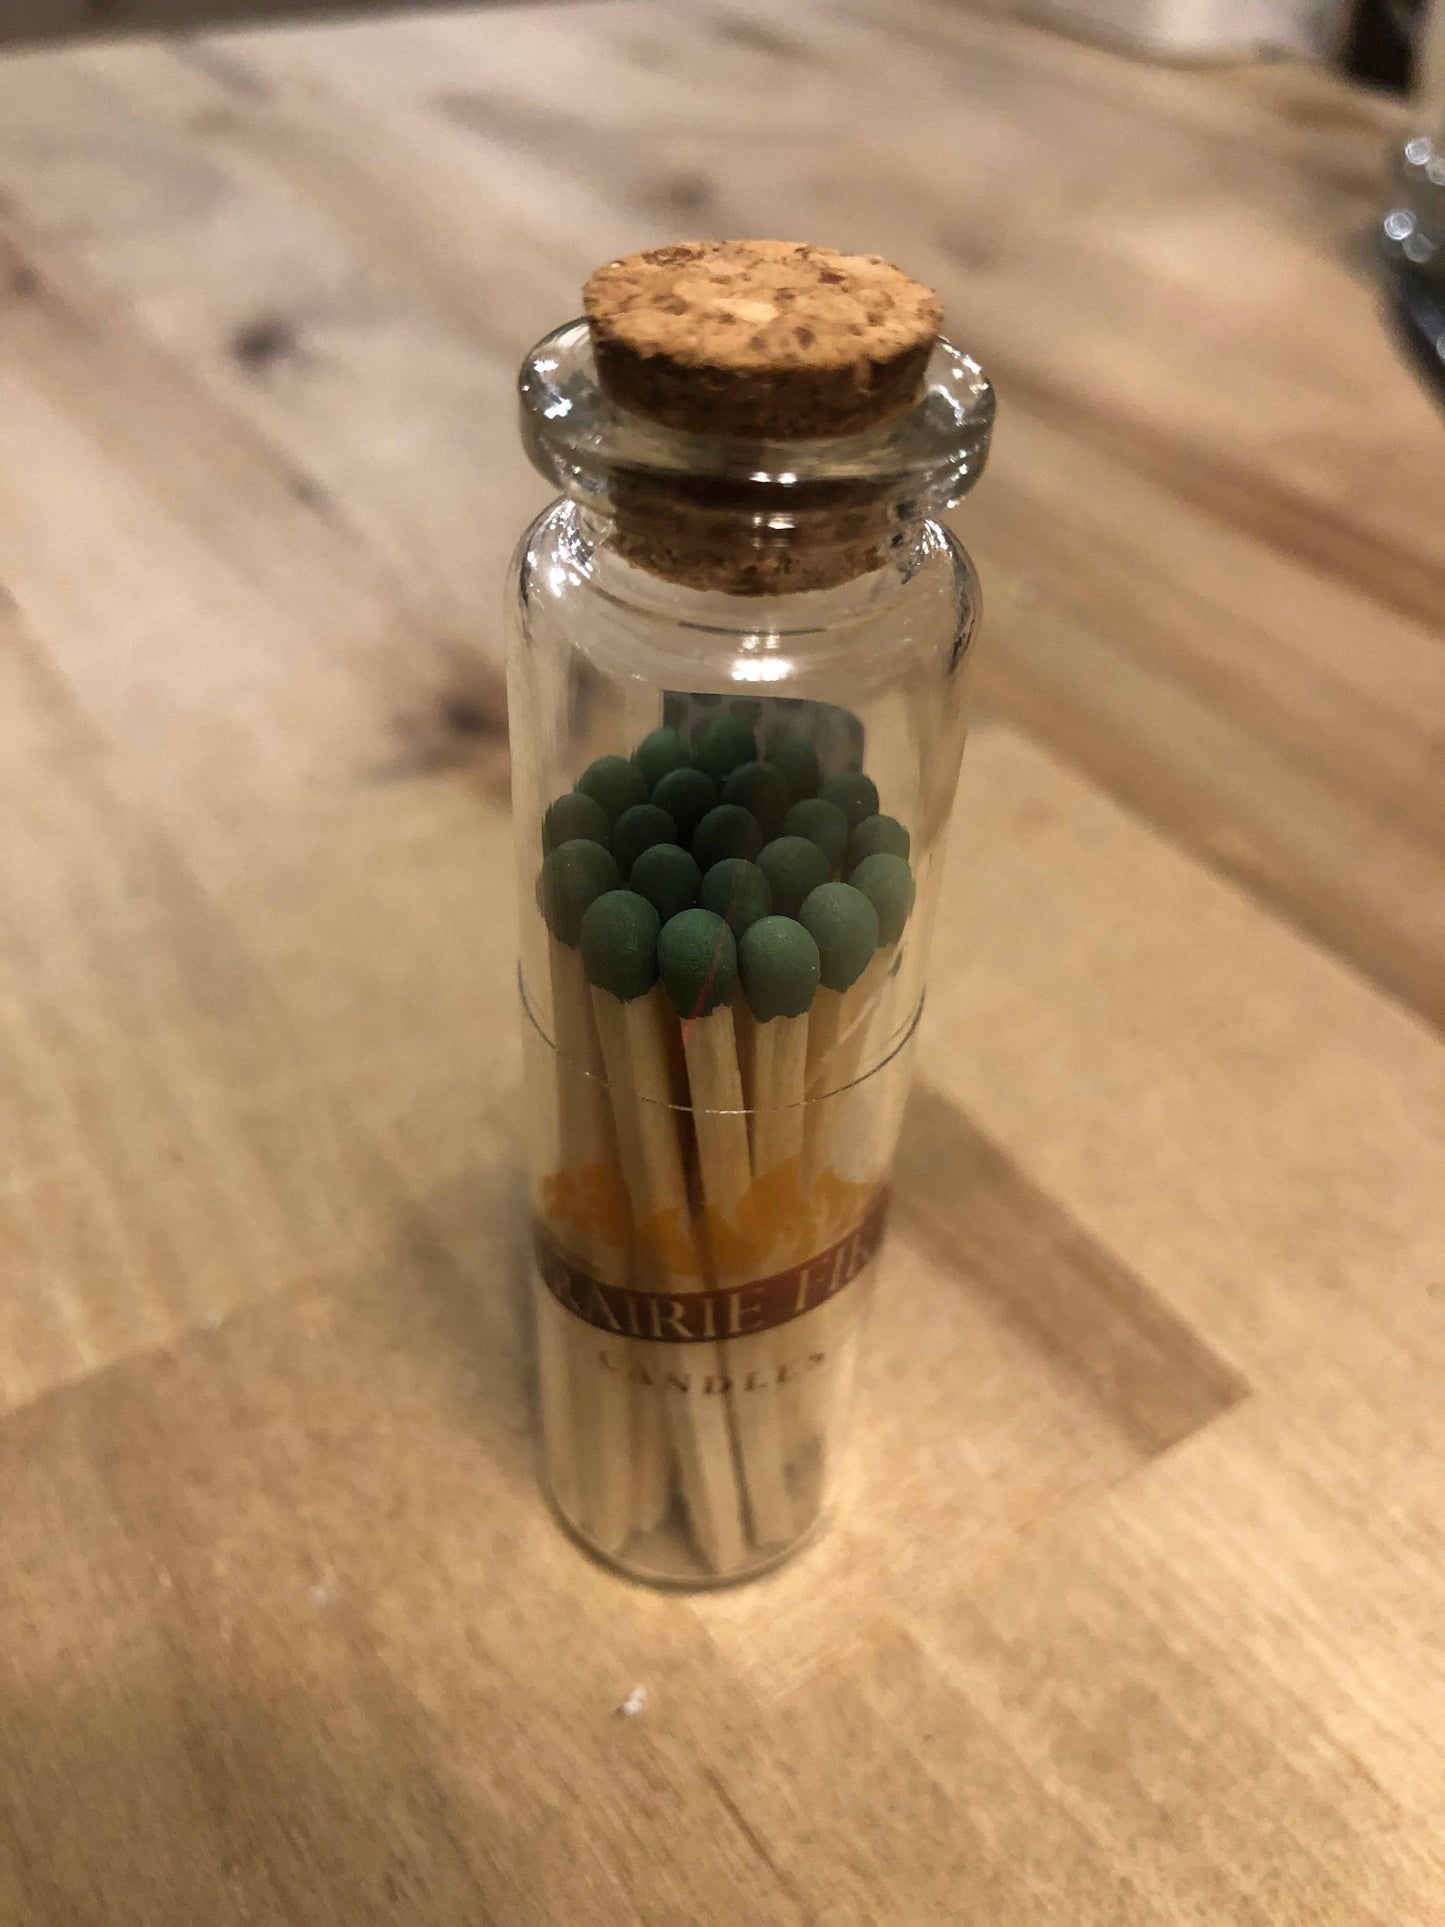 Apothecary Jar Wooden Matches